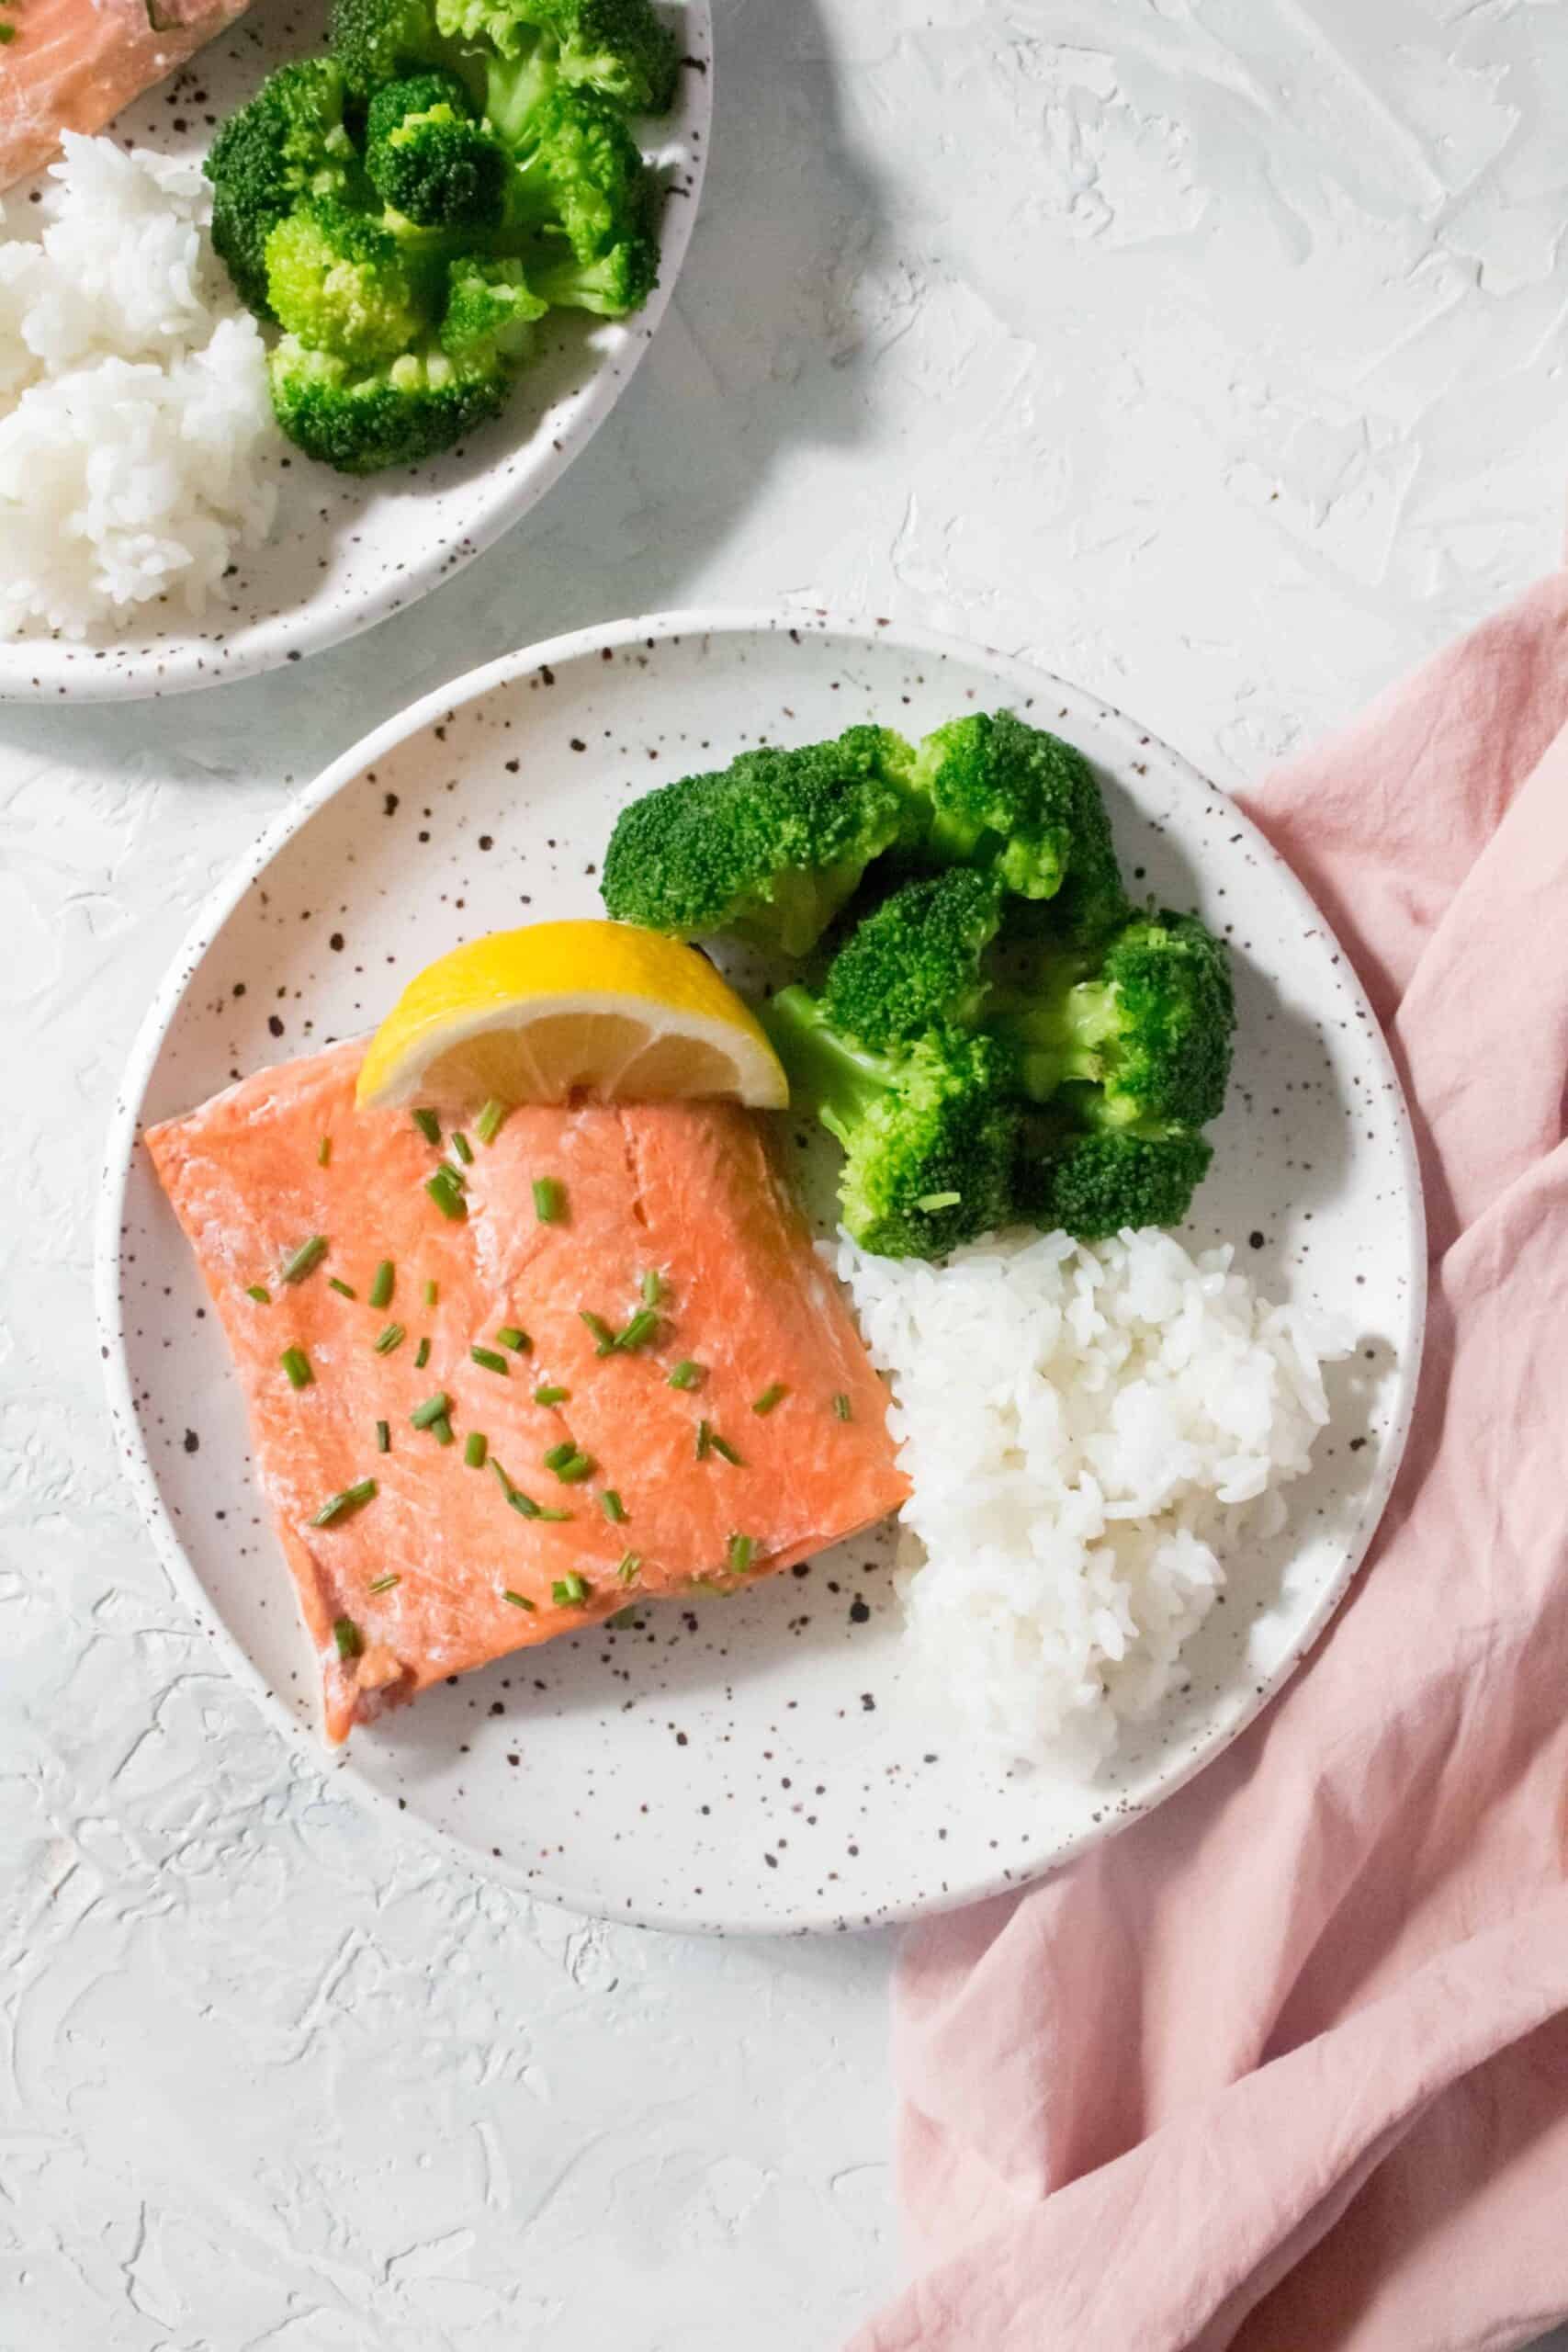 Quick, moist, and, and hands-off, here's my guide on How To Make Salmon in the Instant Pot from both fresh and frozen salmon fillets.